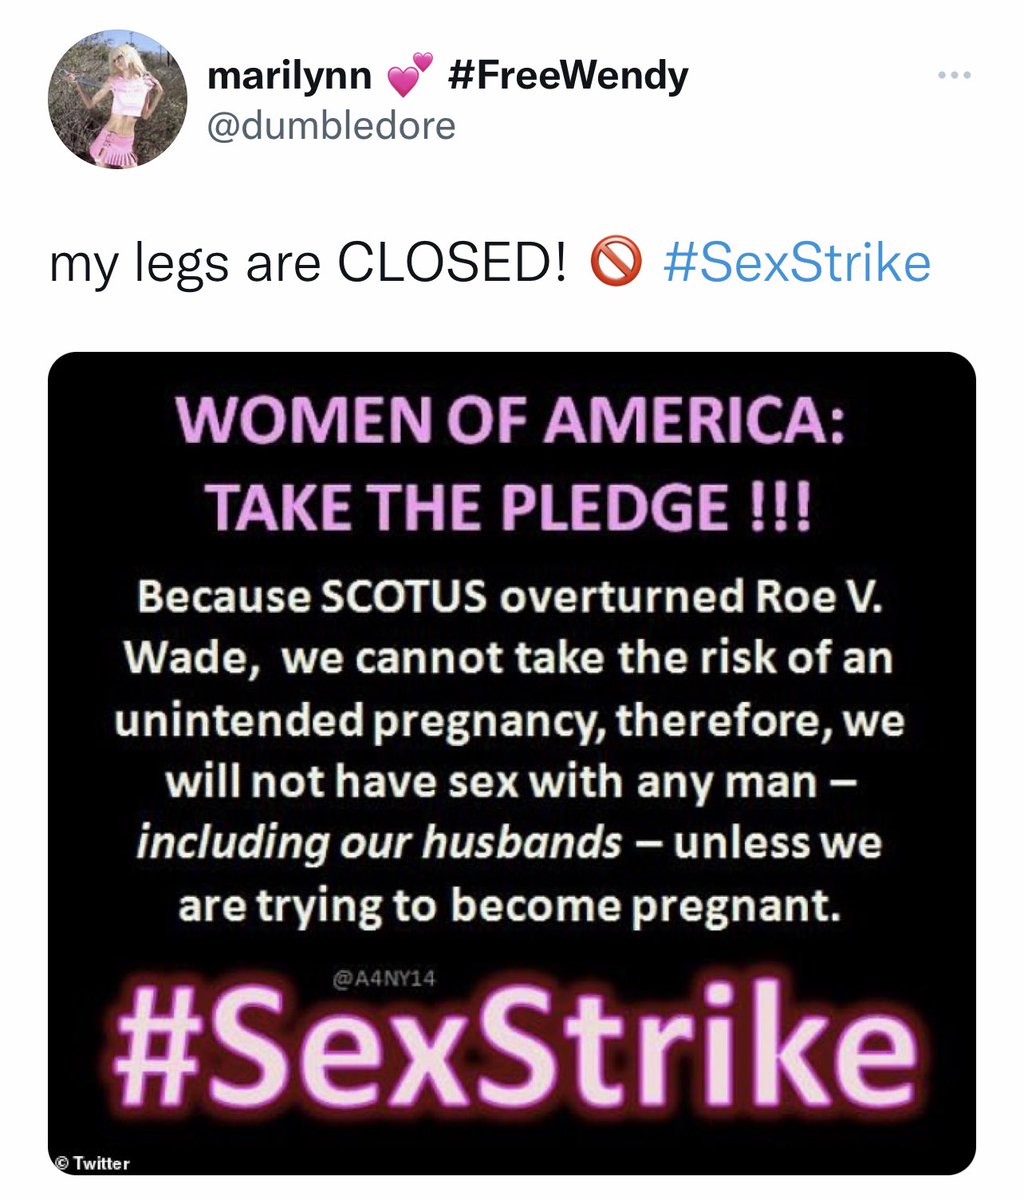 Hehehe🤭 The #SexStrike is here! This is good!